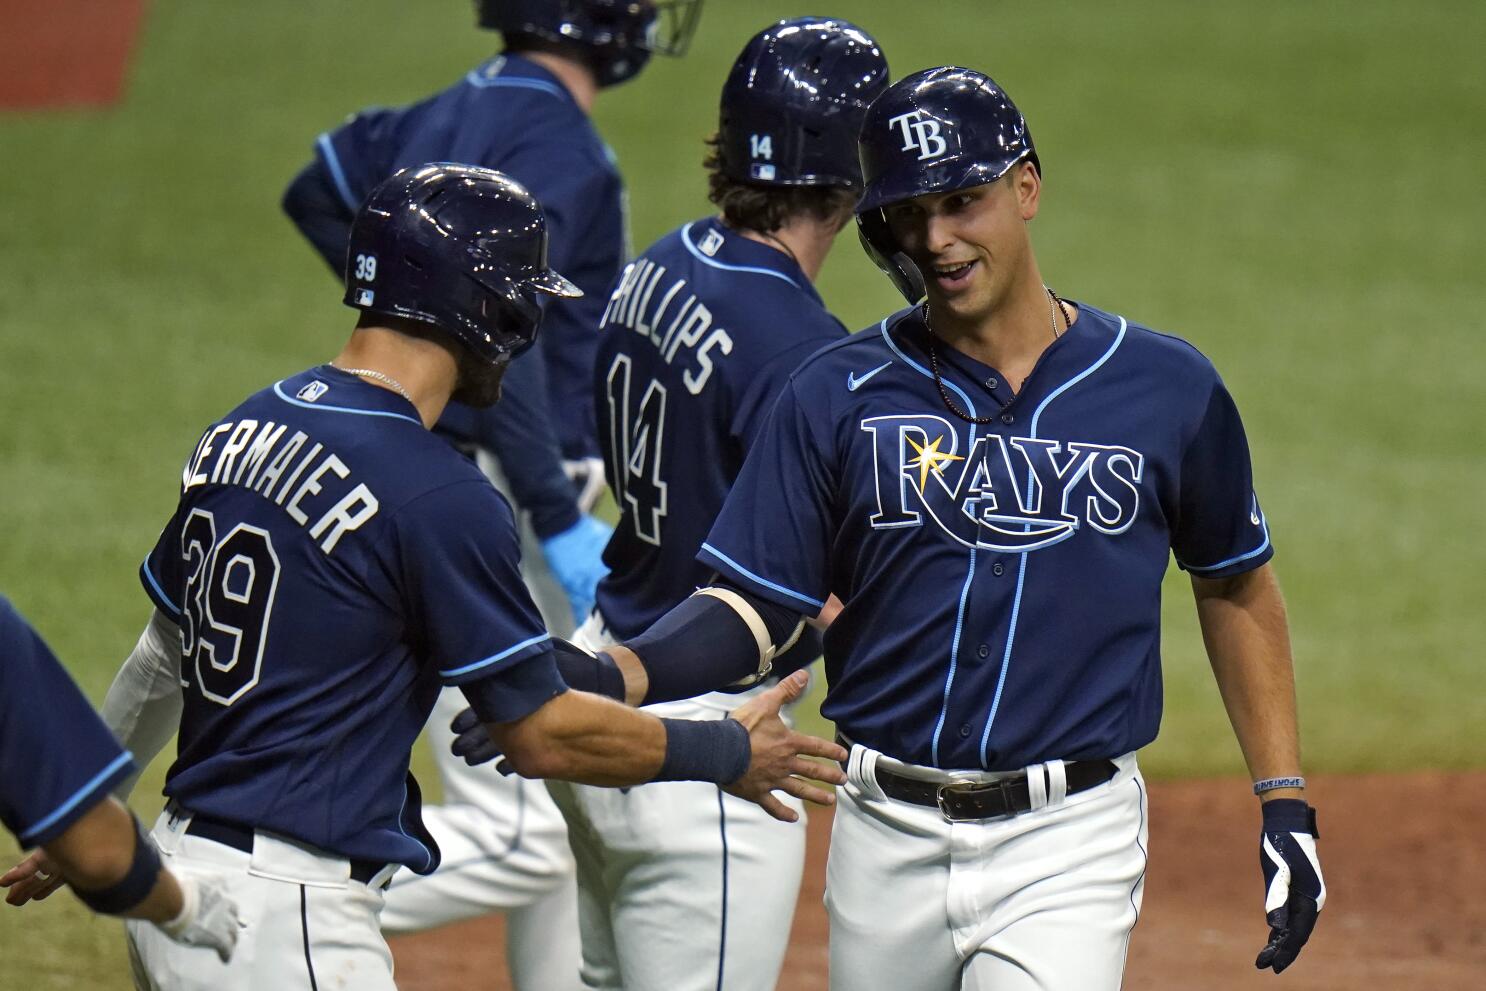 Rays start all left-handed lineup and beat Red Sox 11-1 - The San